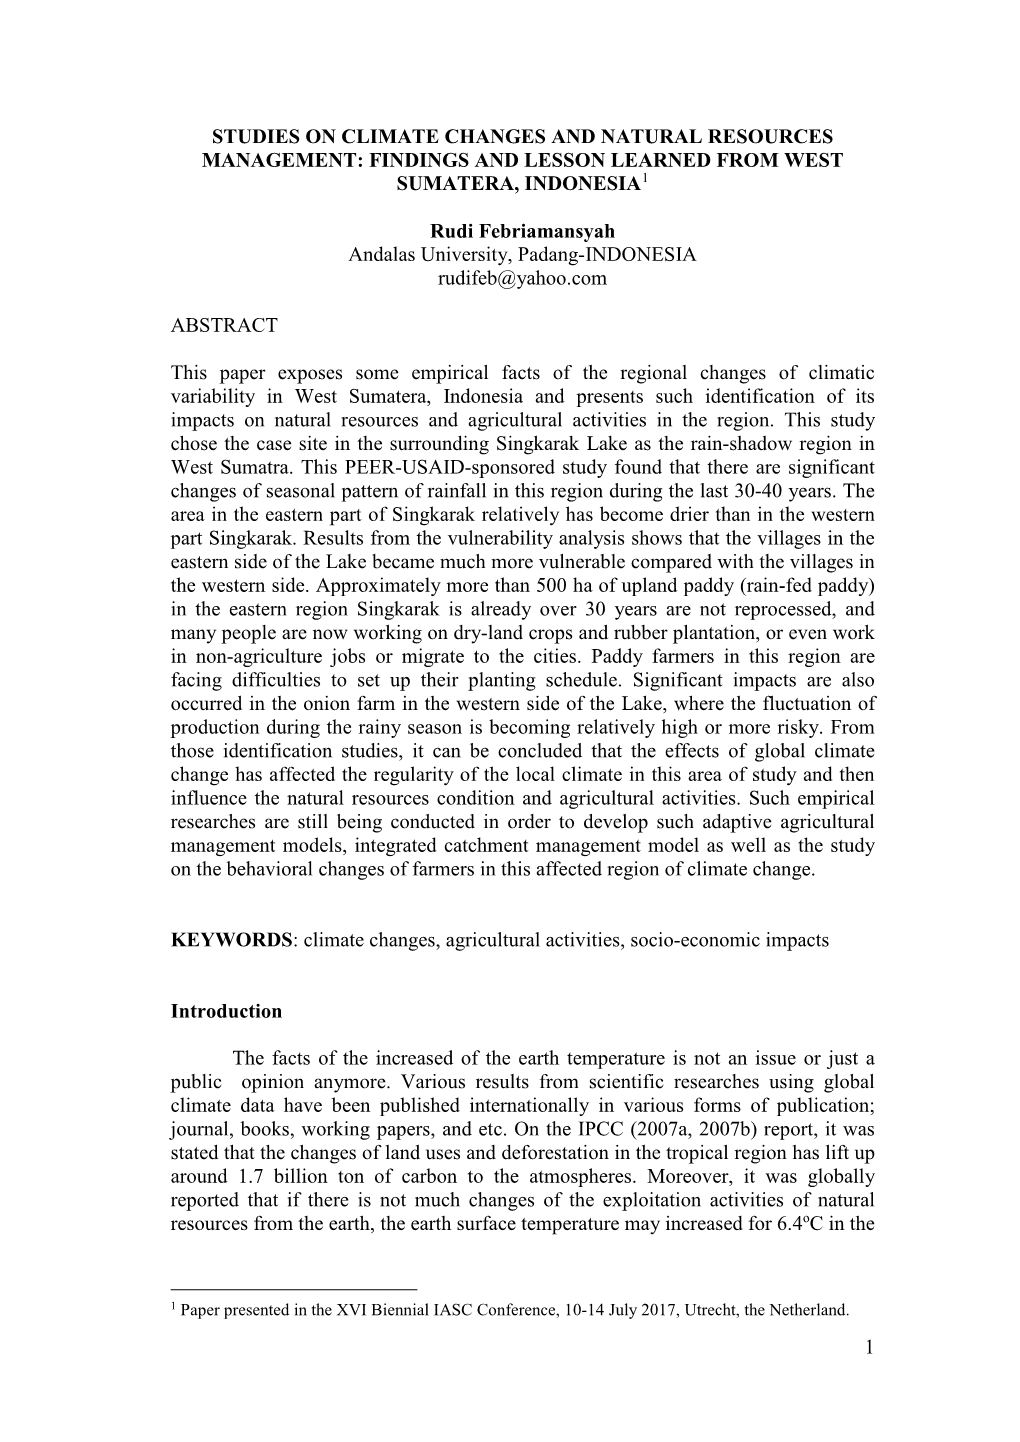 Studies on Climate Changes and Natural Resources Management: Findings and Lesson Learned from West Sumatera, Indonesia1